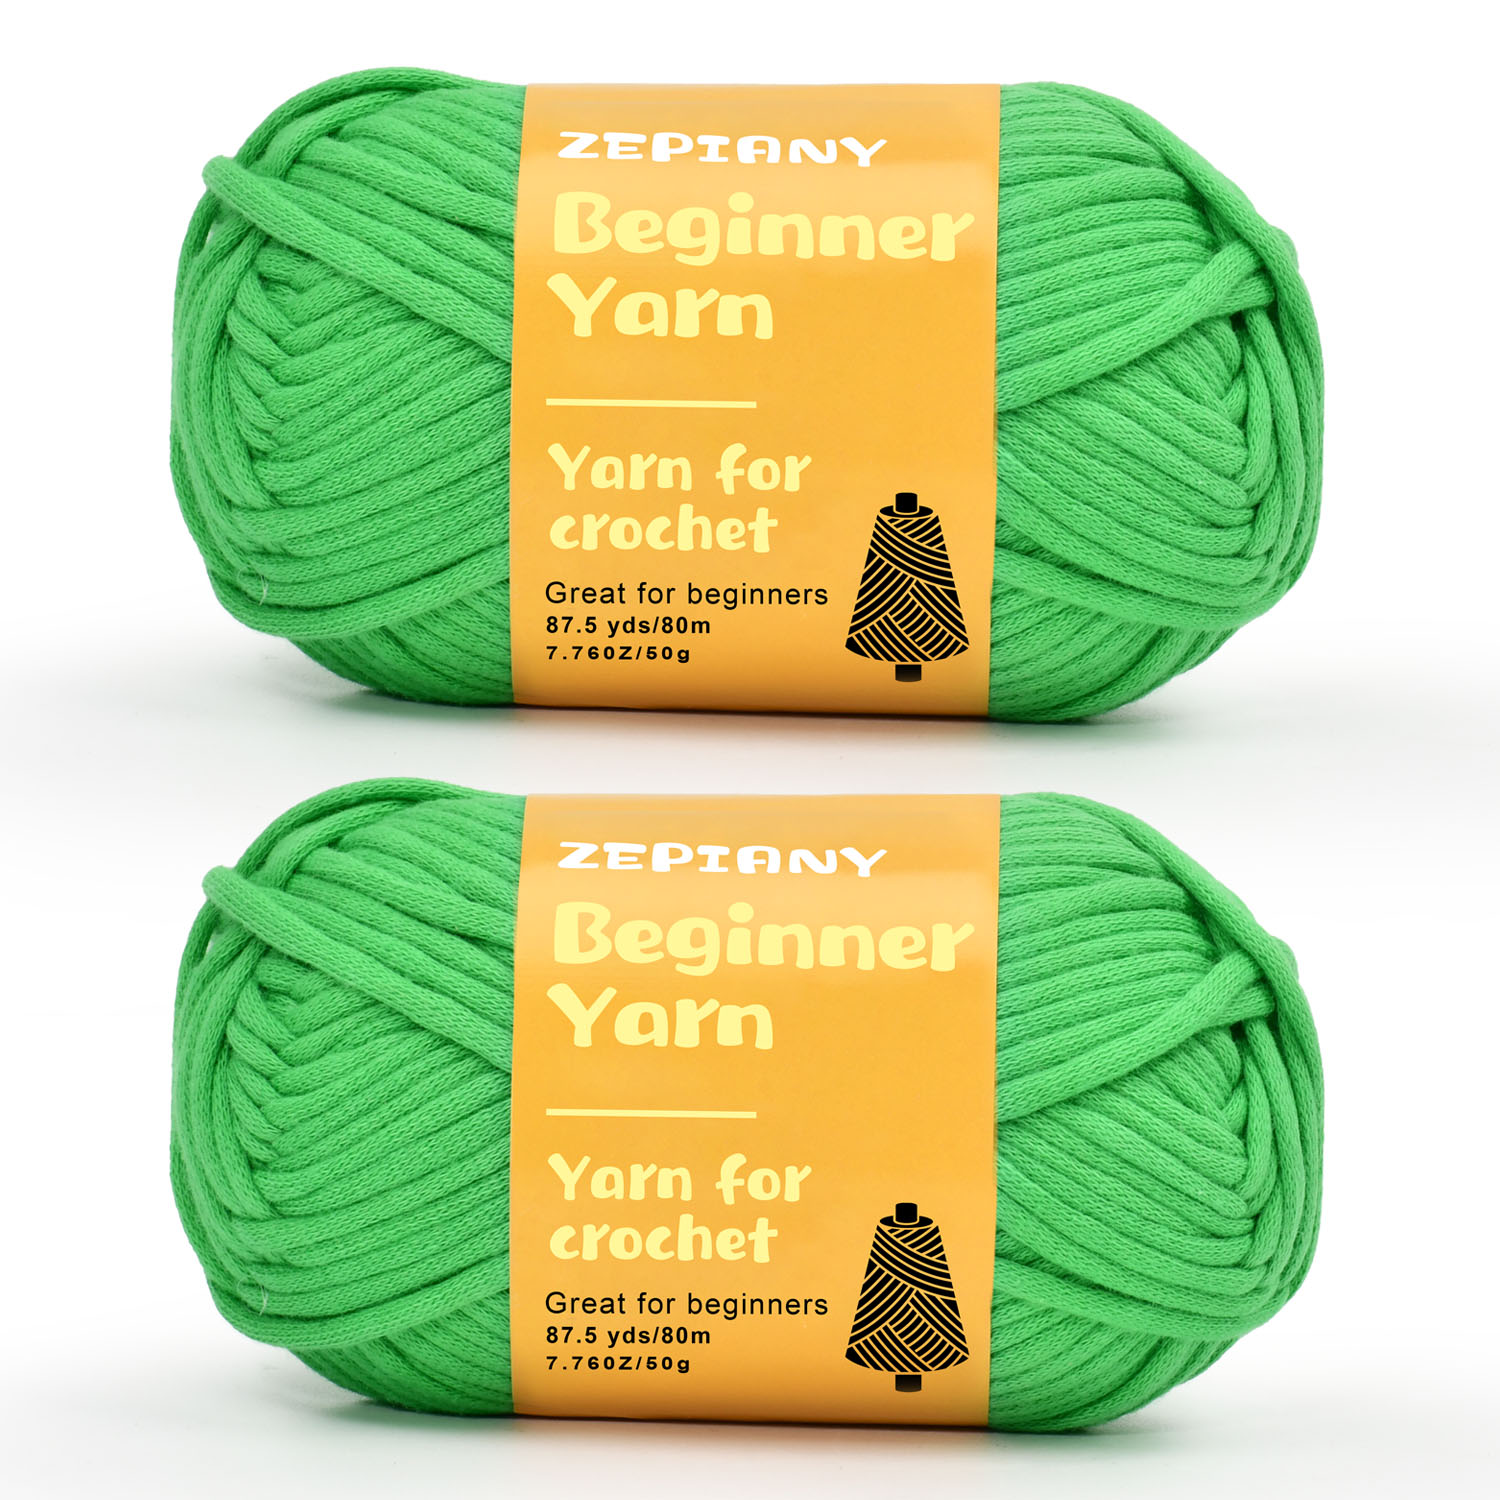  3x60g Forest Green Yarn for Crocheting and Knitting;3x66m  (72yds) Cotton Yarn for Beginners with Easy-to-See Stitches;Worsted-Weight  Medium #4;Cotton-Nylon Blend Yarn for Beginners Crochet Kit Making